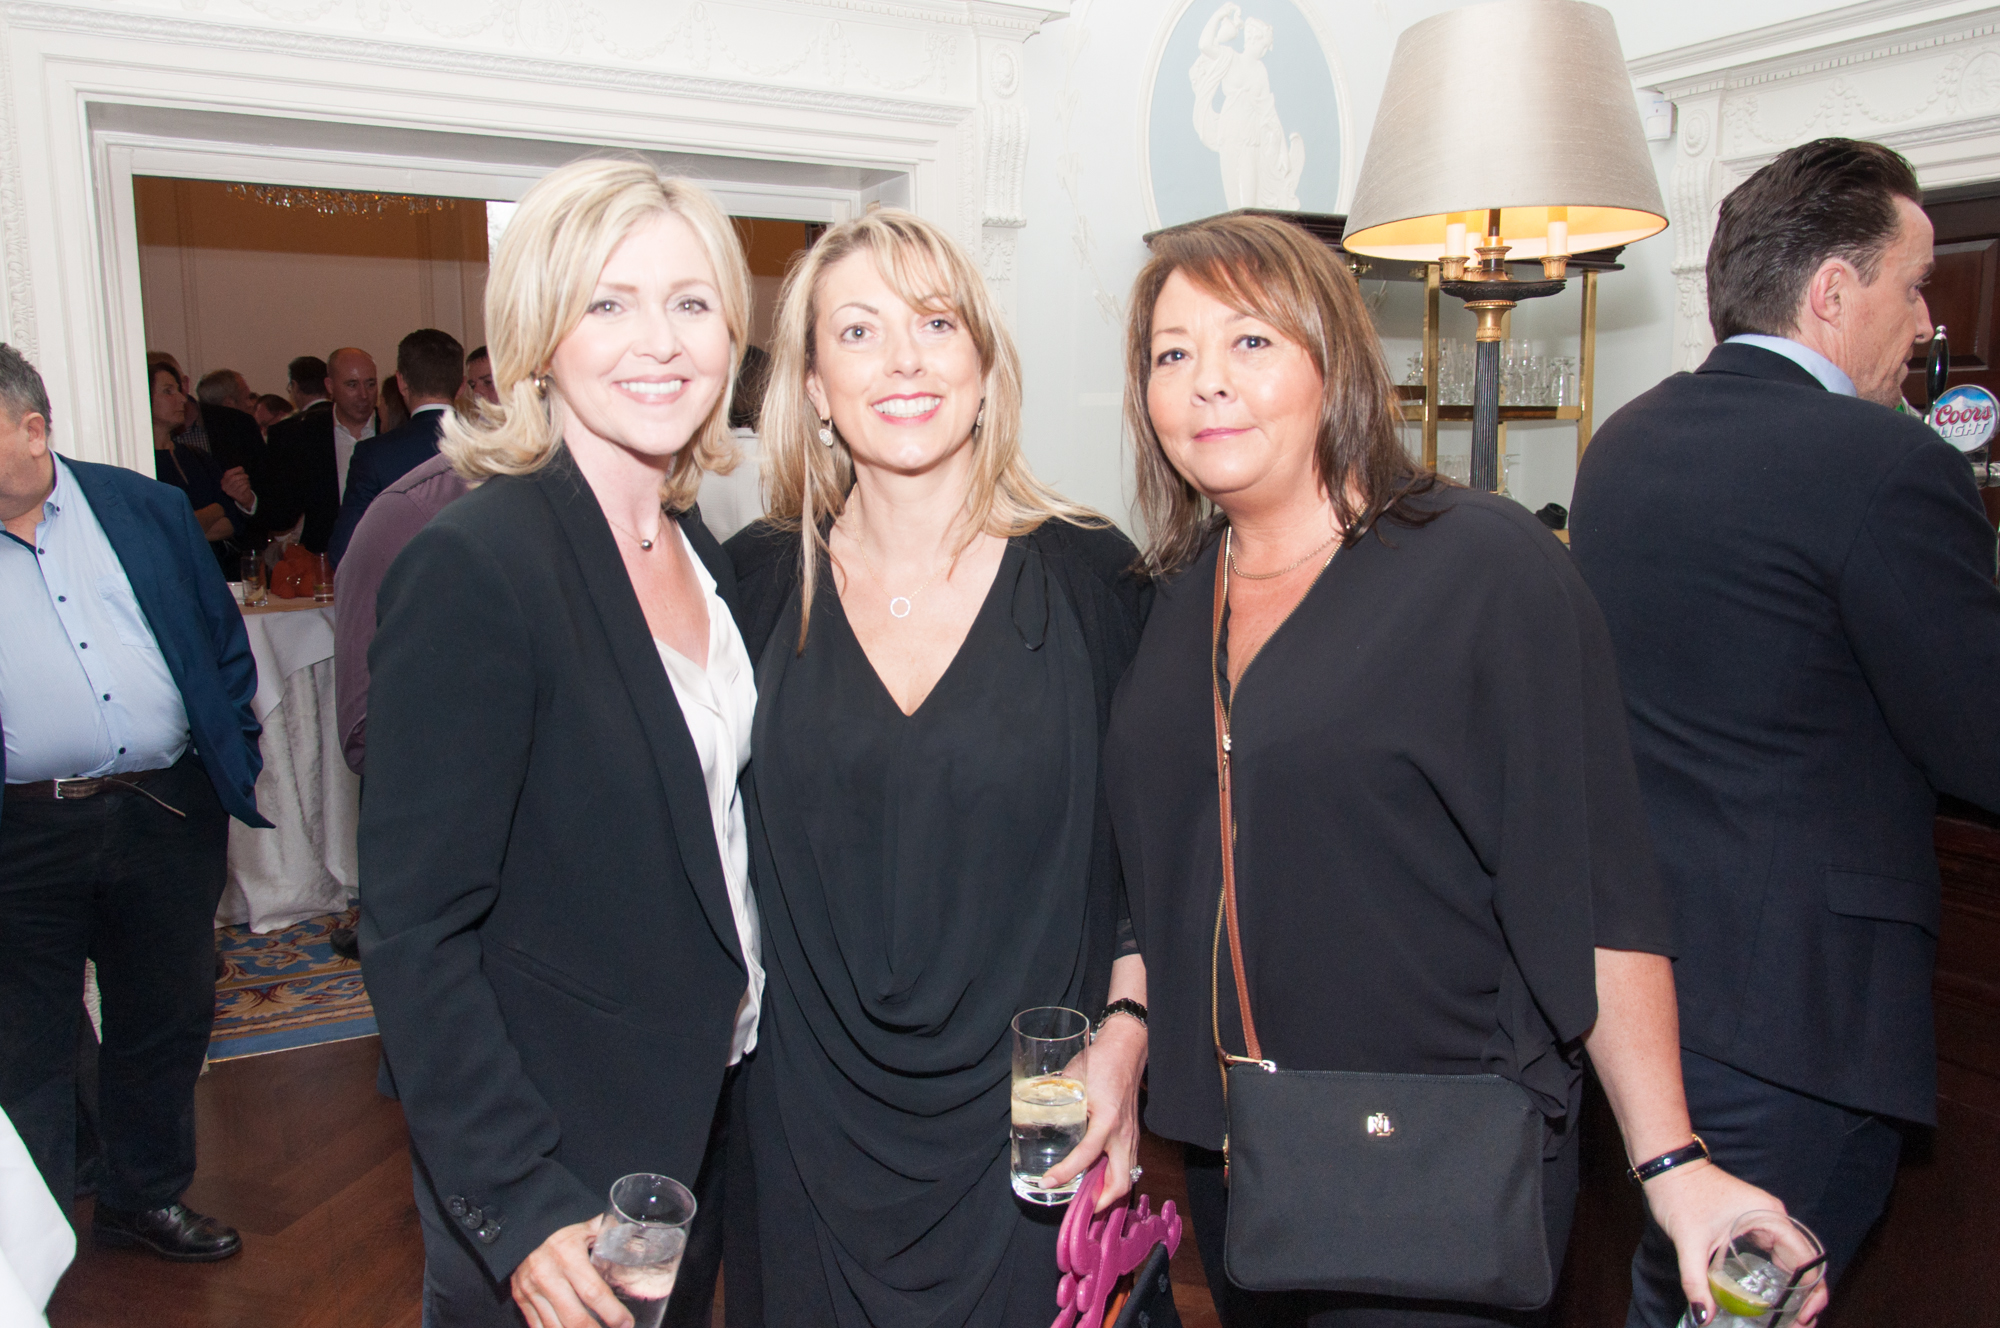 St Gerard's School Past Pupils Union Lunch at Shelbourne Hotel by Natalia Marzec_ low res77